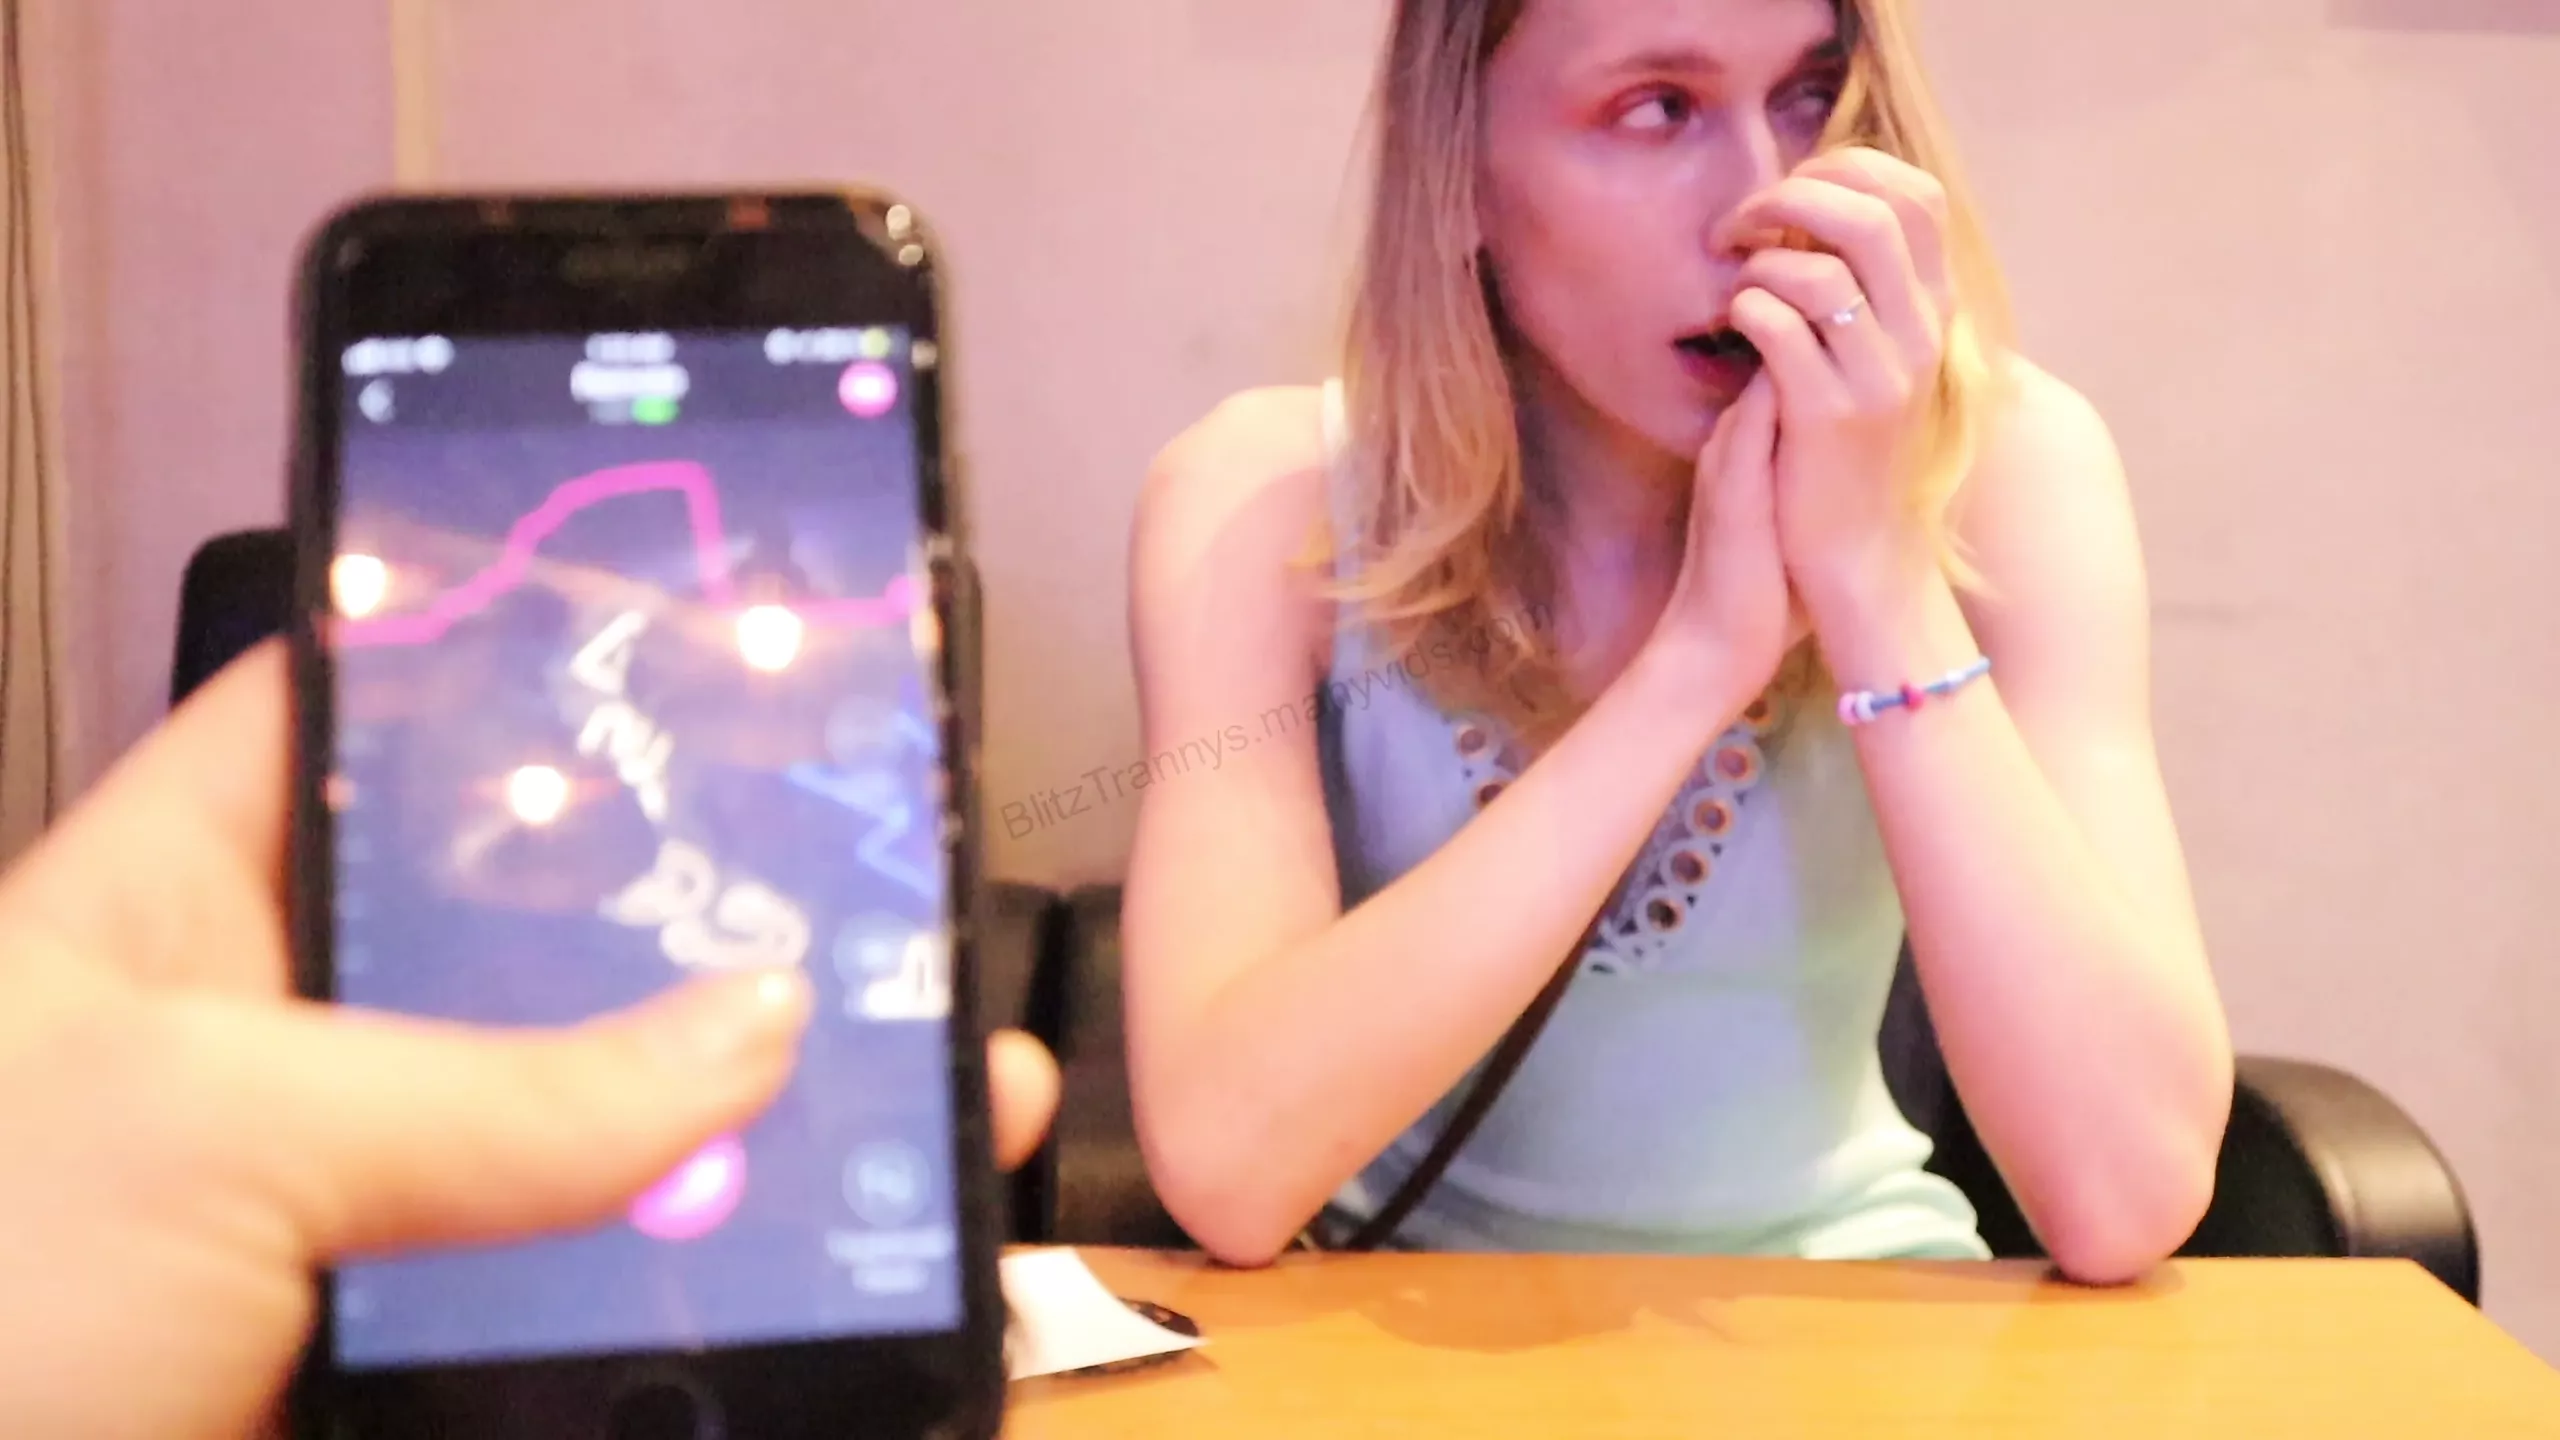 Extreme play with vibrator in Cafe!